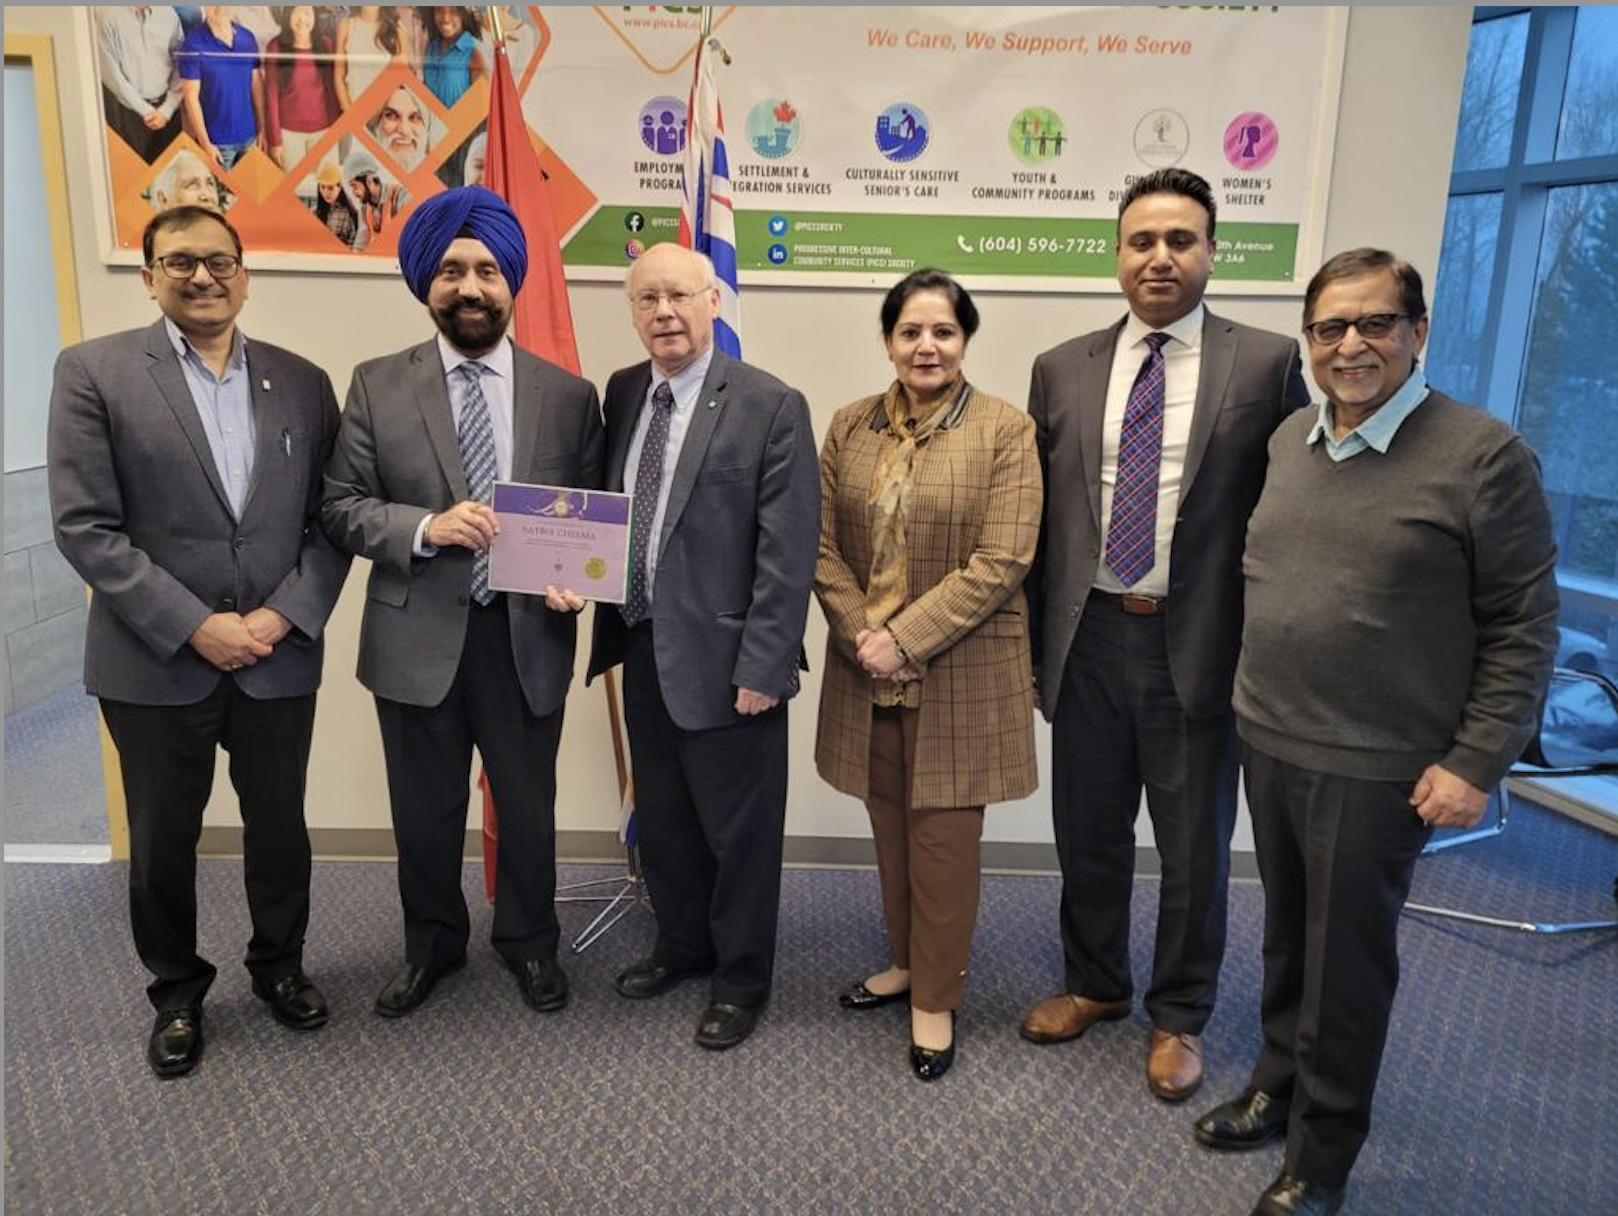 PICS Board Members (L-R - Parveen Goel, Maninder Grewal, Kam Pawar & Arvinder Bubber) and PICS's President and CEO pose for a picture with Honorable Member of Parliament Ken Hardie who presented Satbir Singh Cheema with the Queen’s Platinum Jubilee Award for outstanding service to the community.  